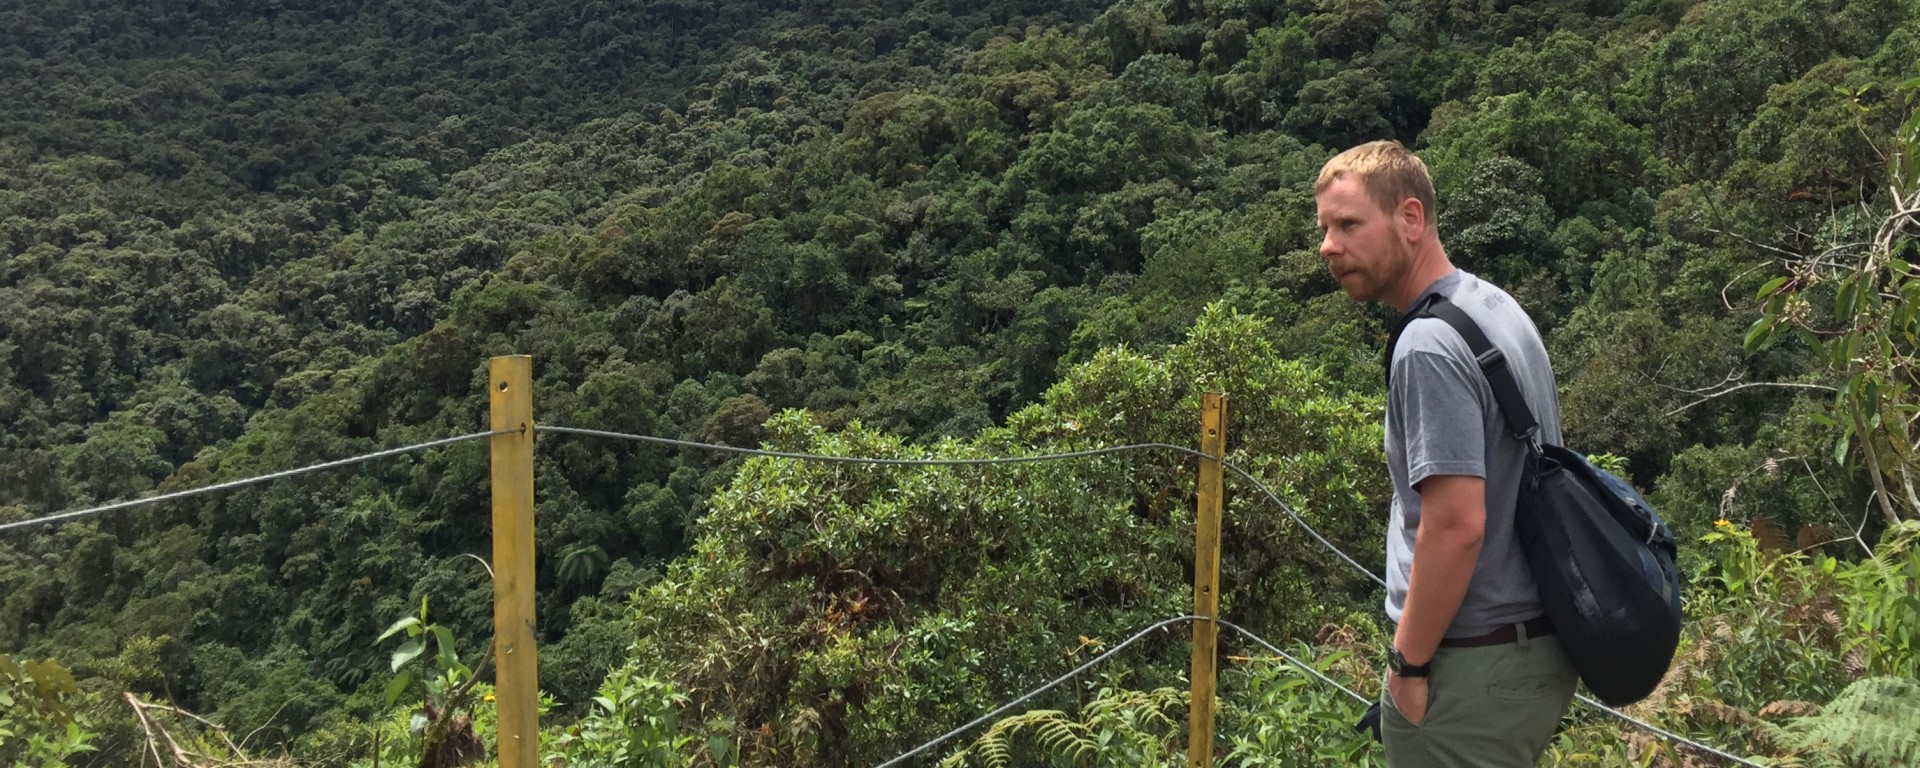 Joe Brown in a rainforest environment in Bolivia